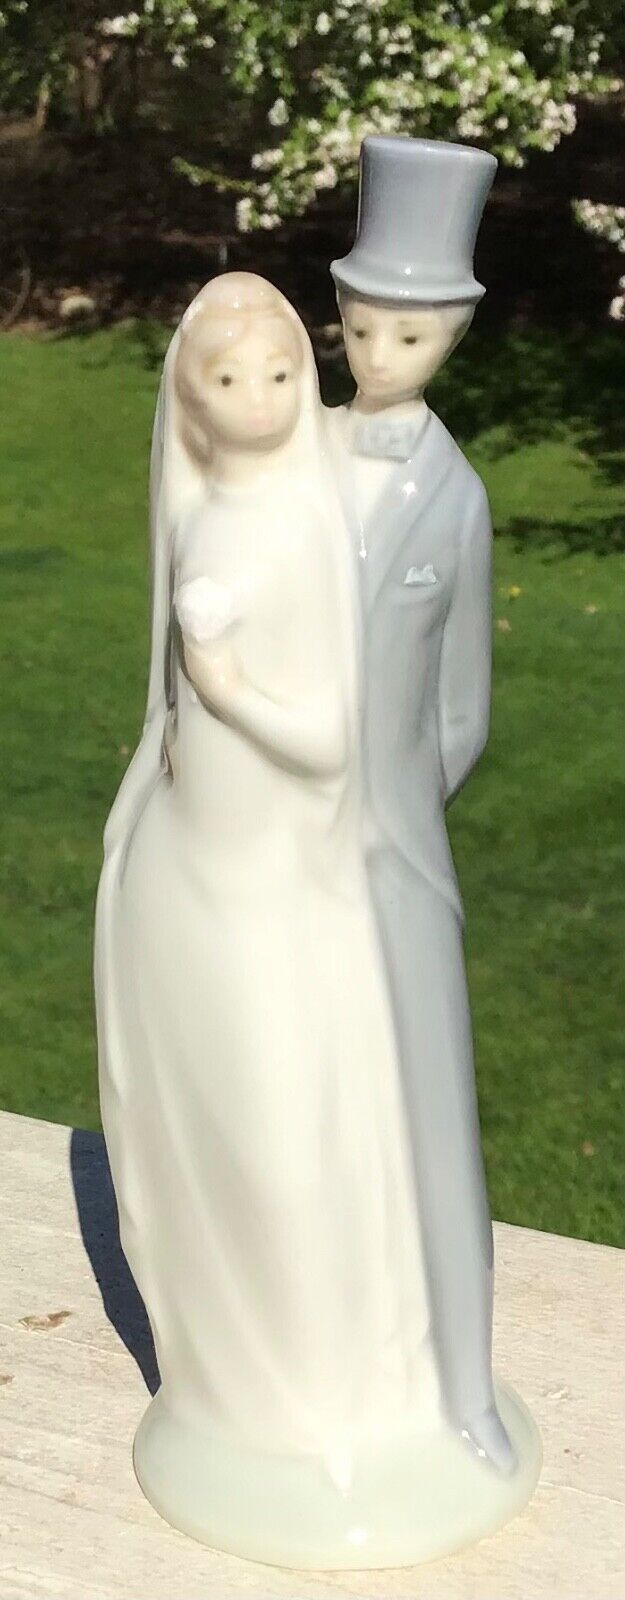 NAO by LLADRO BRIDE AND GROOM FIGURINE CAKE TOPPER, 6 1/8”